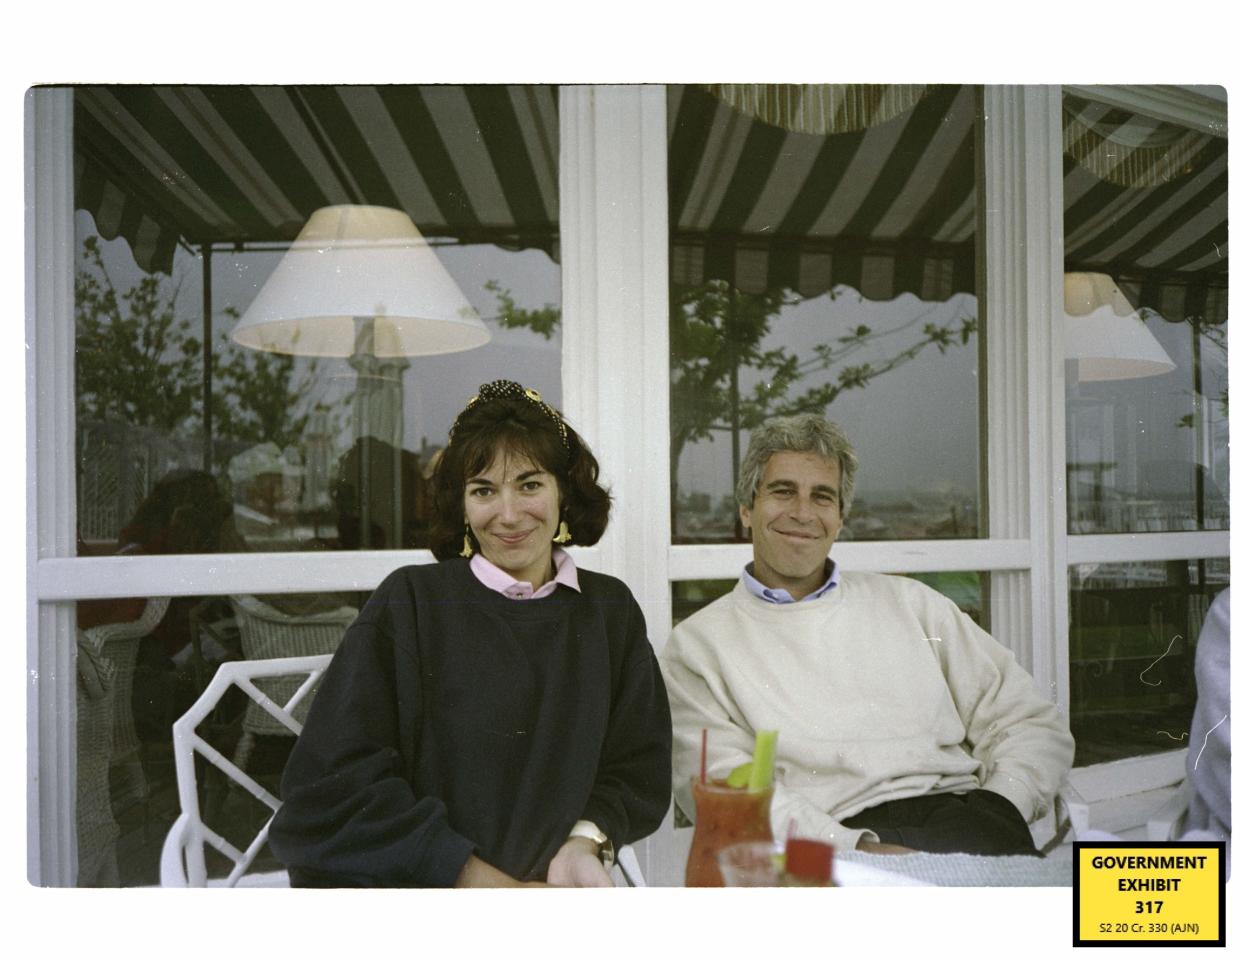 An undated photo released as a government exhibit in the 2021 trial of Ghislaine Maxwell, showing her close relationship with Jeffrey Epstein.